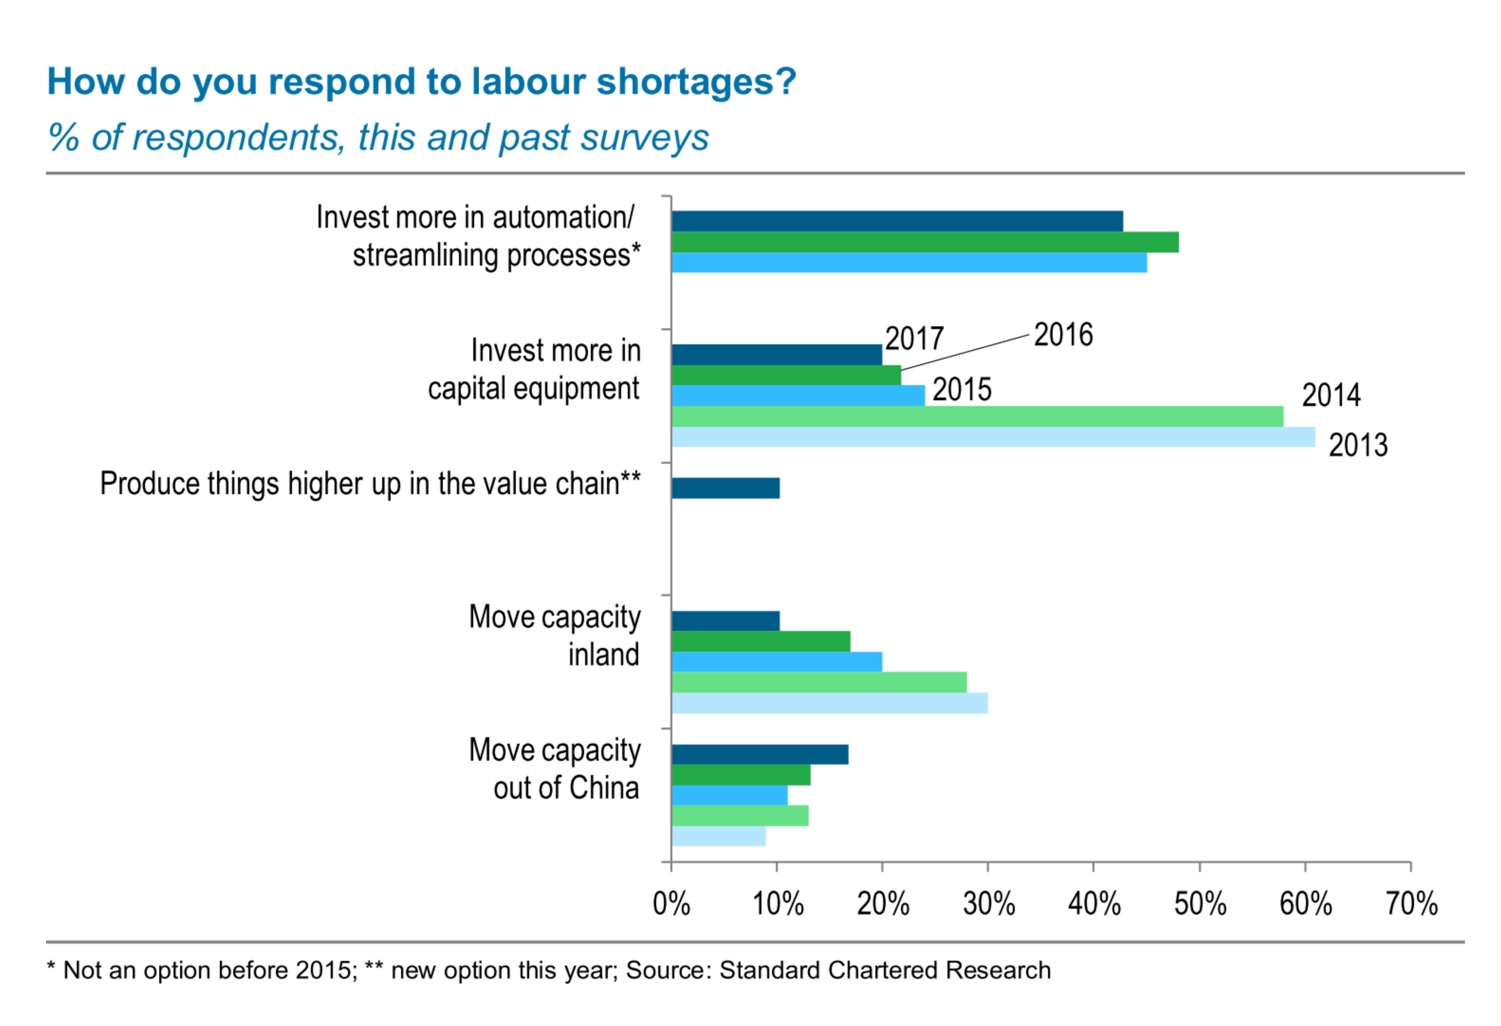 Graph showing % of respondents and how they respond to labour shortages